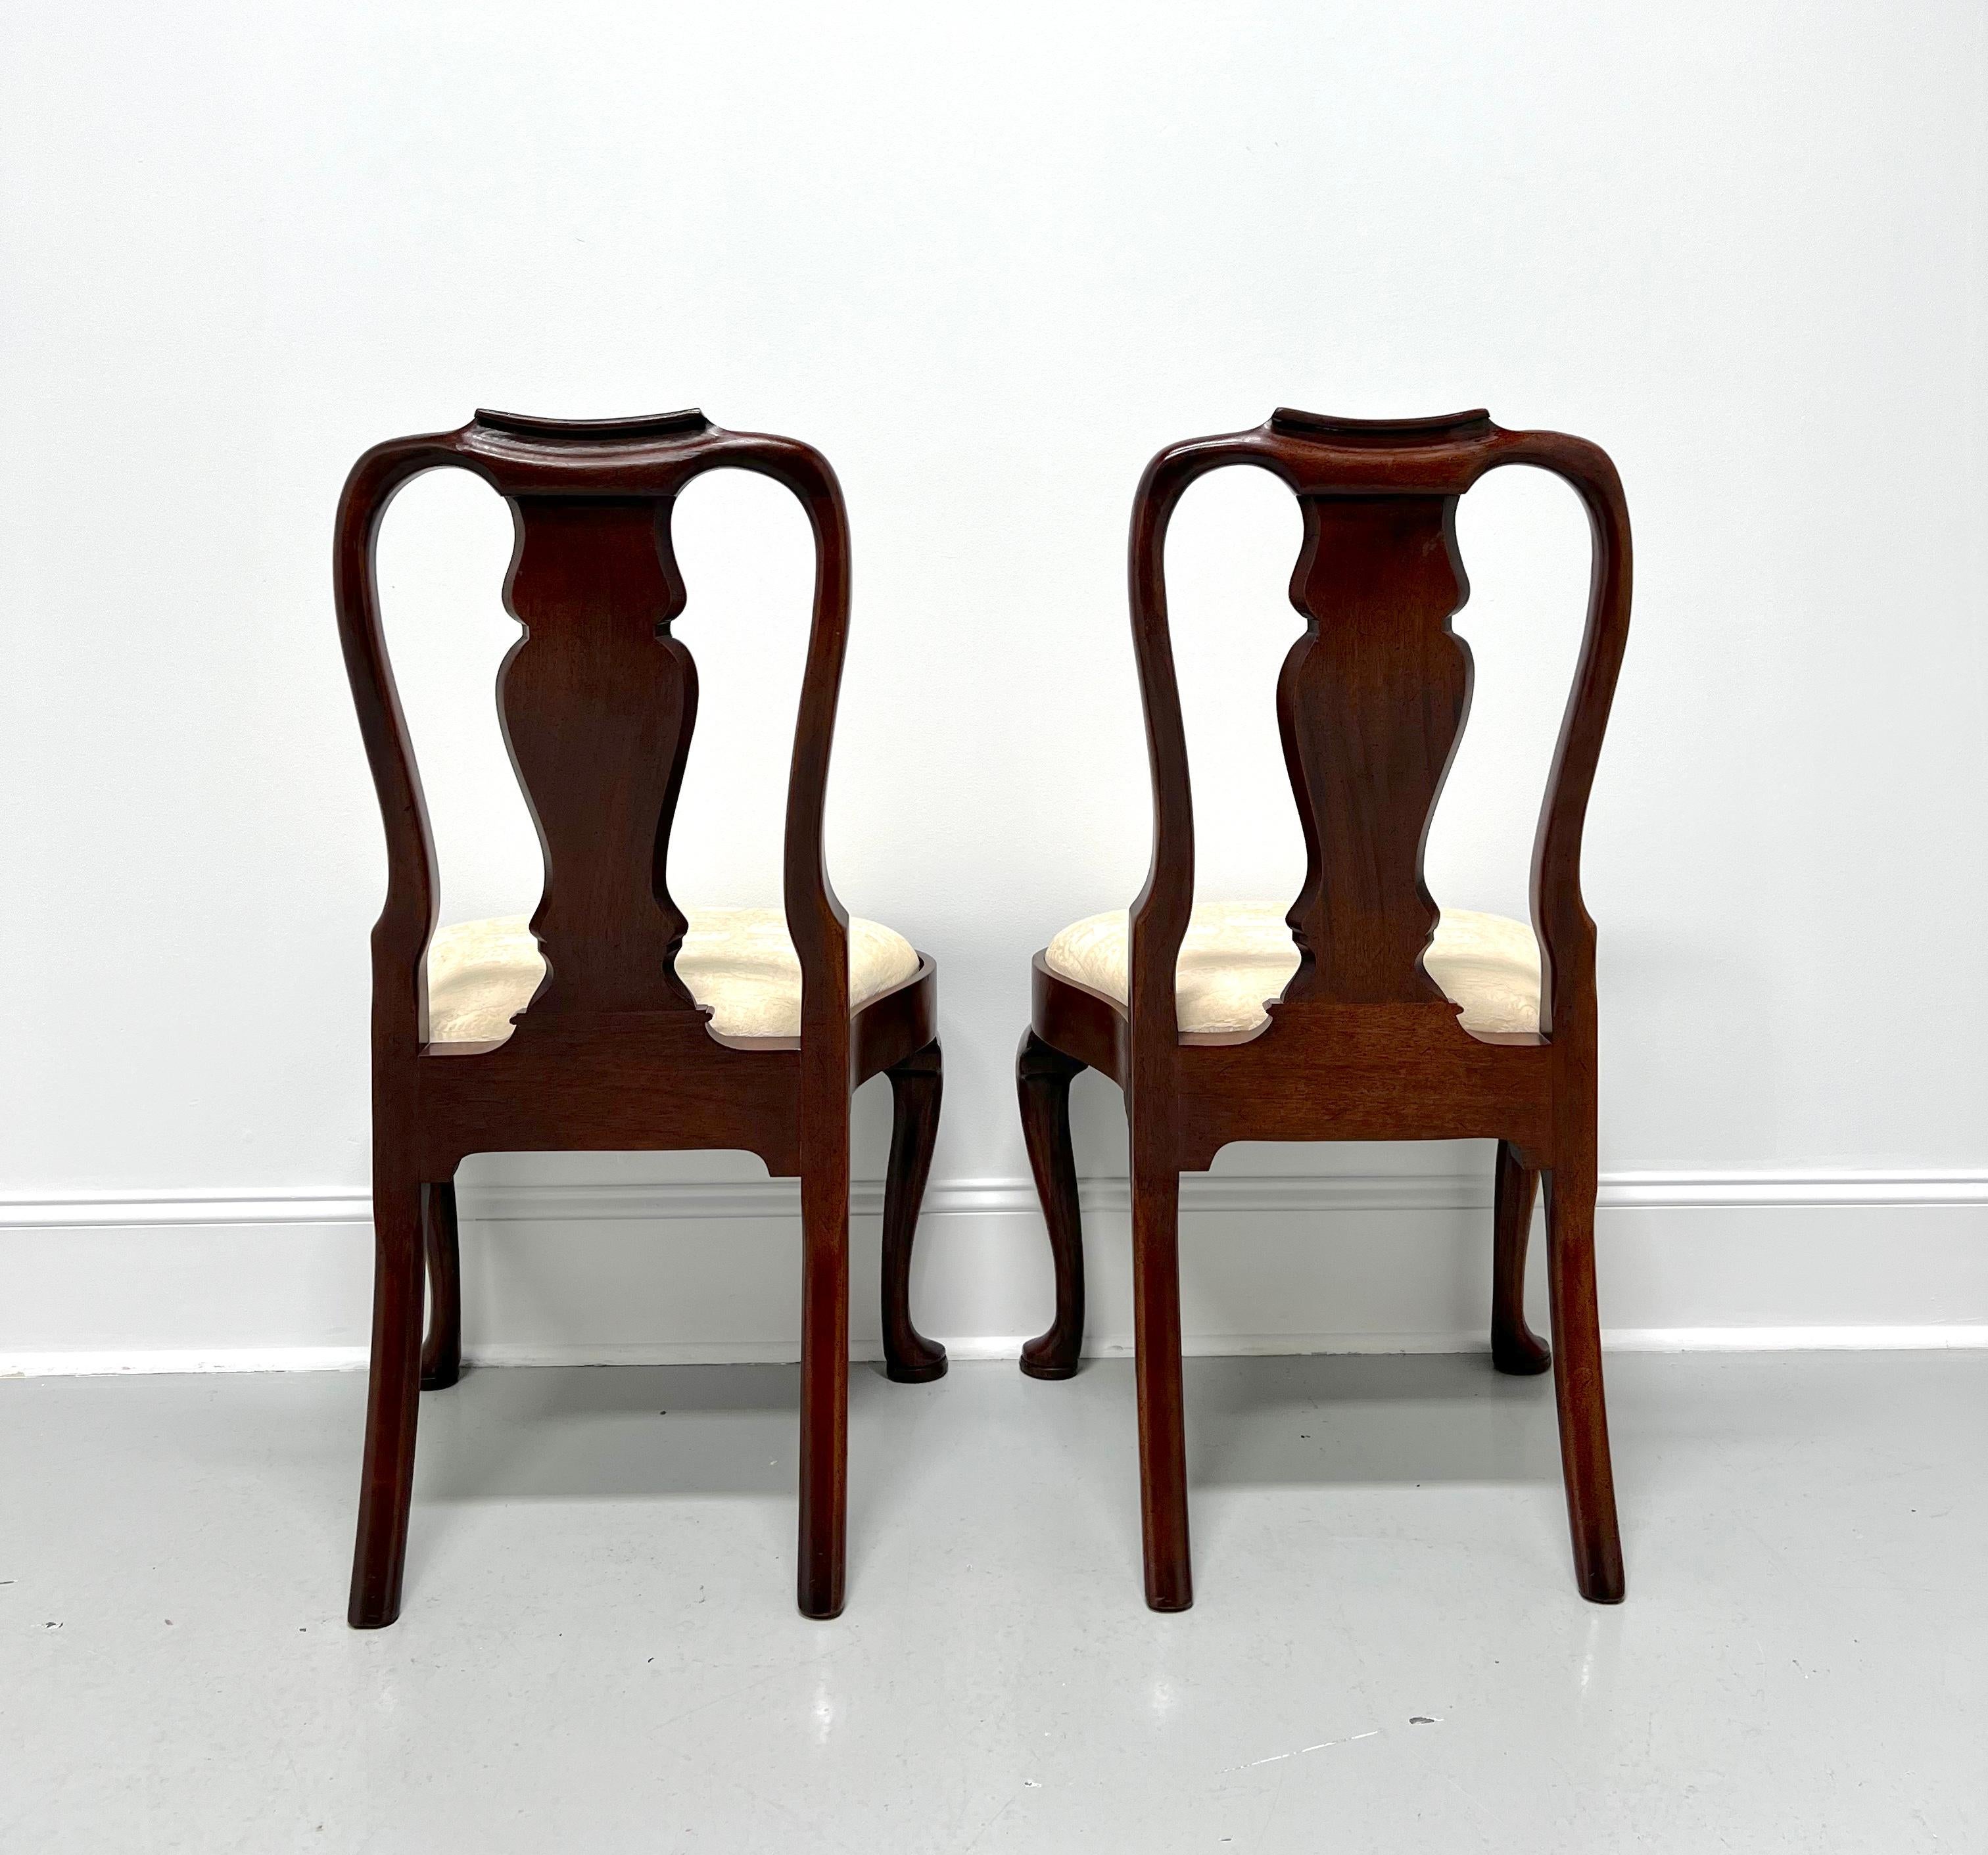 HICKORY CHAIR Mahogany Queen Anne Dining Side Chairs - Pair In Good Condition For Sale In Charlotte, NC